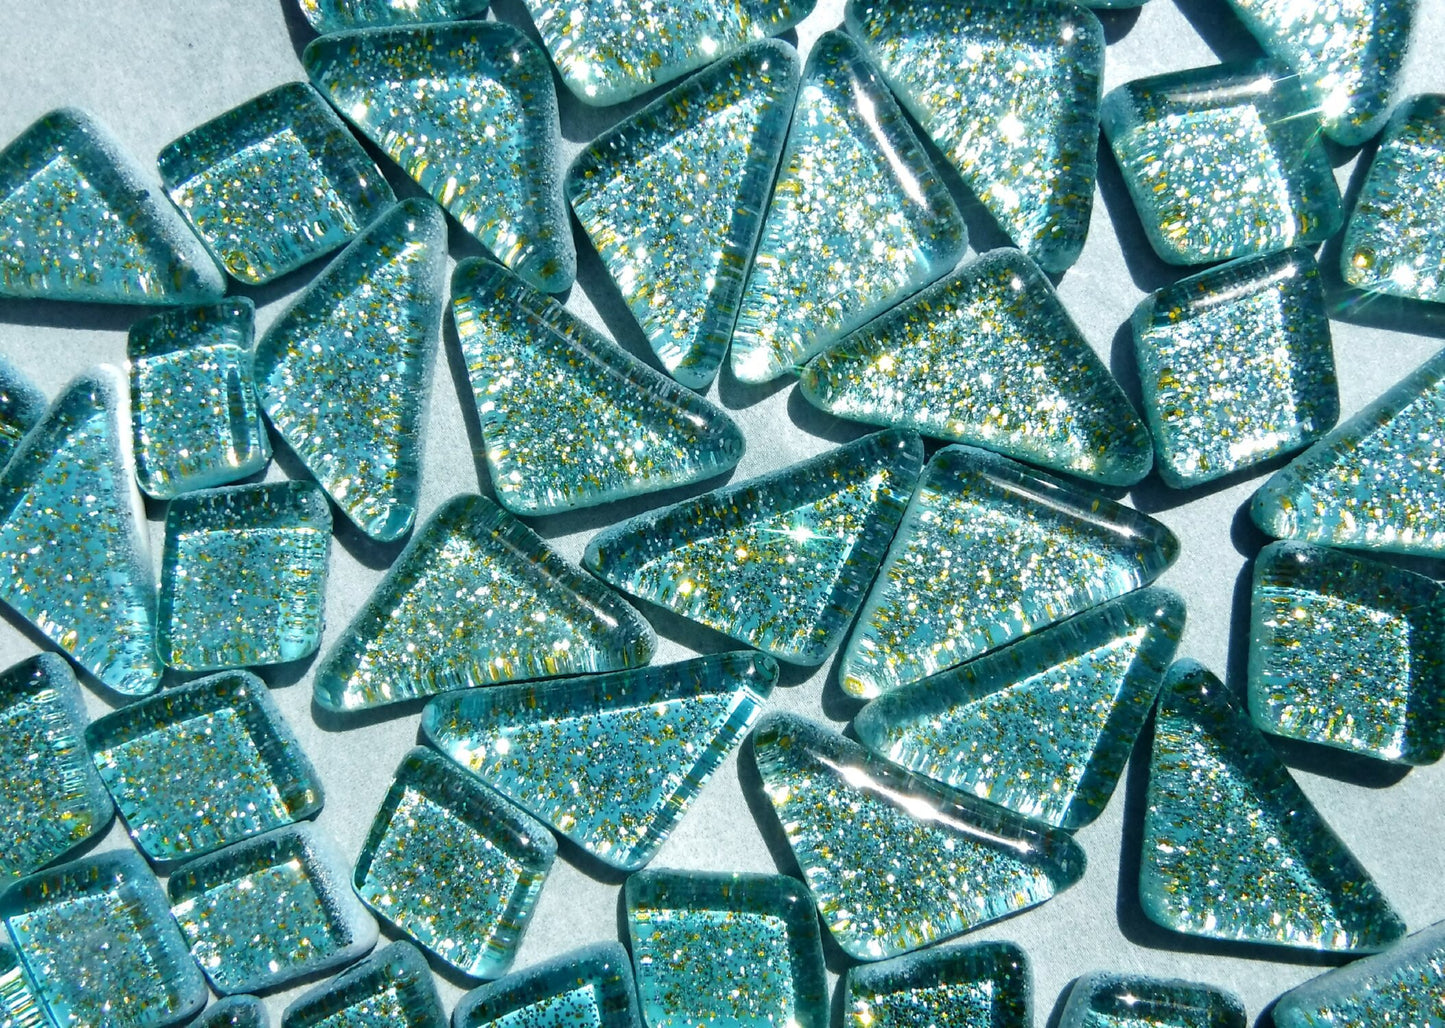 Jungle Green Glitter Puzzle Tiles - 100 grams in Assorted Shapes Glass Mosaic Tiles